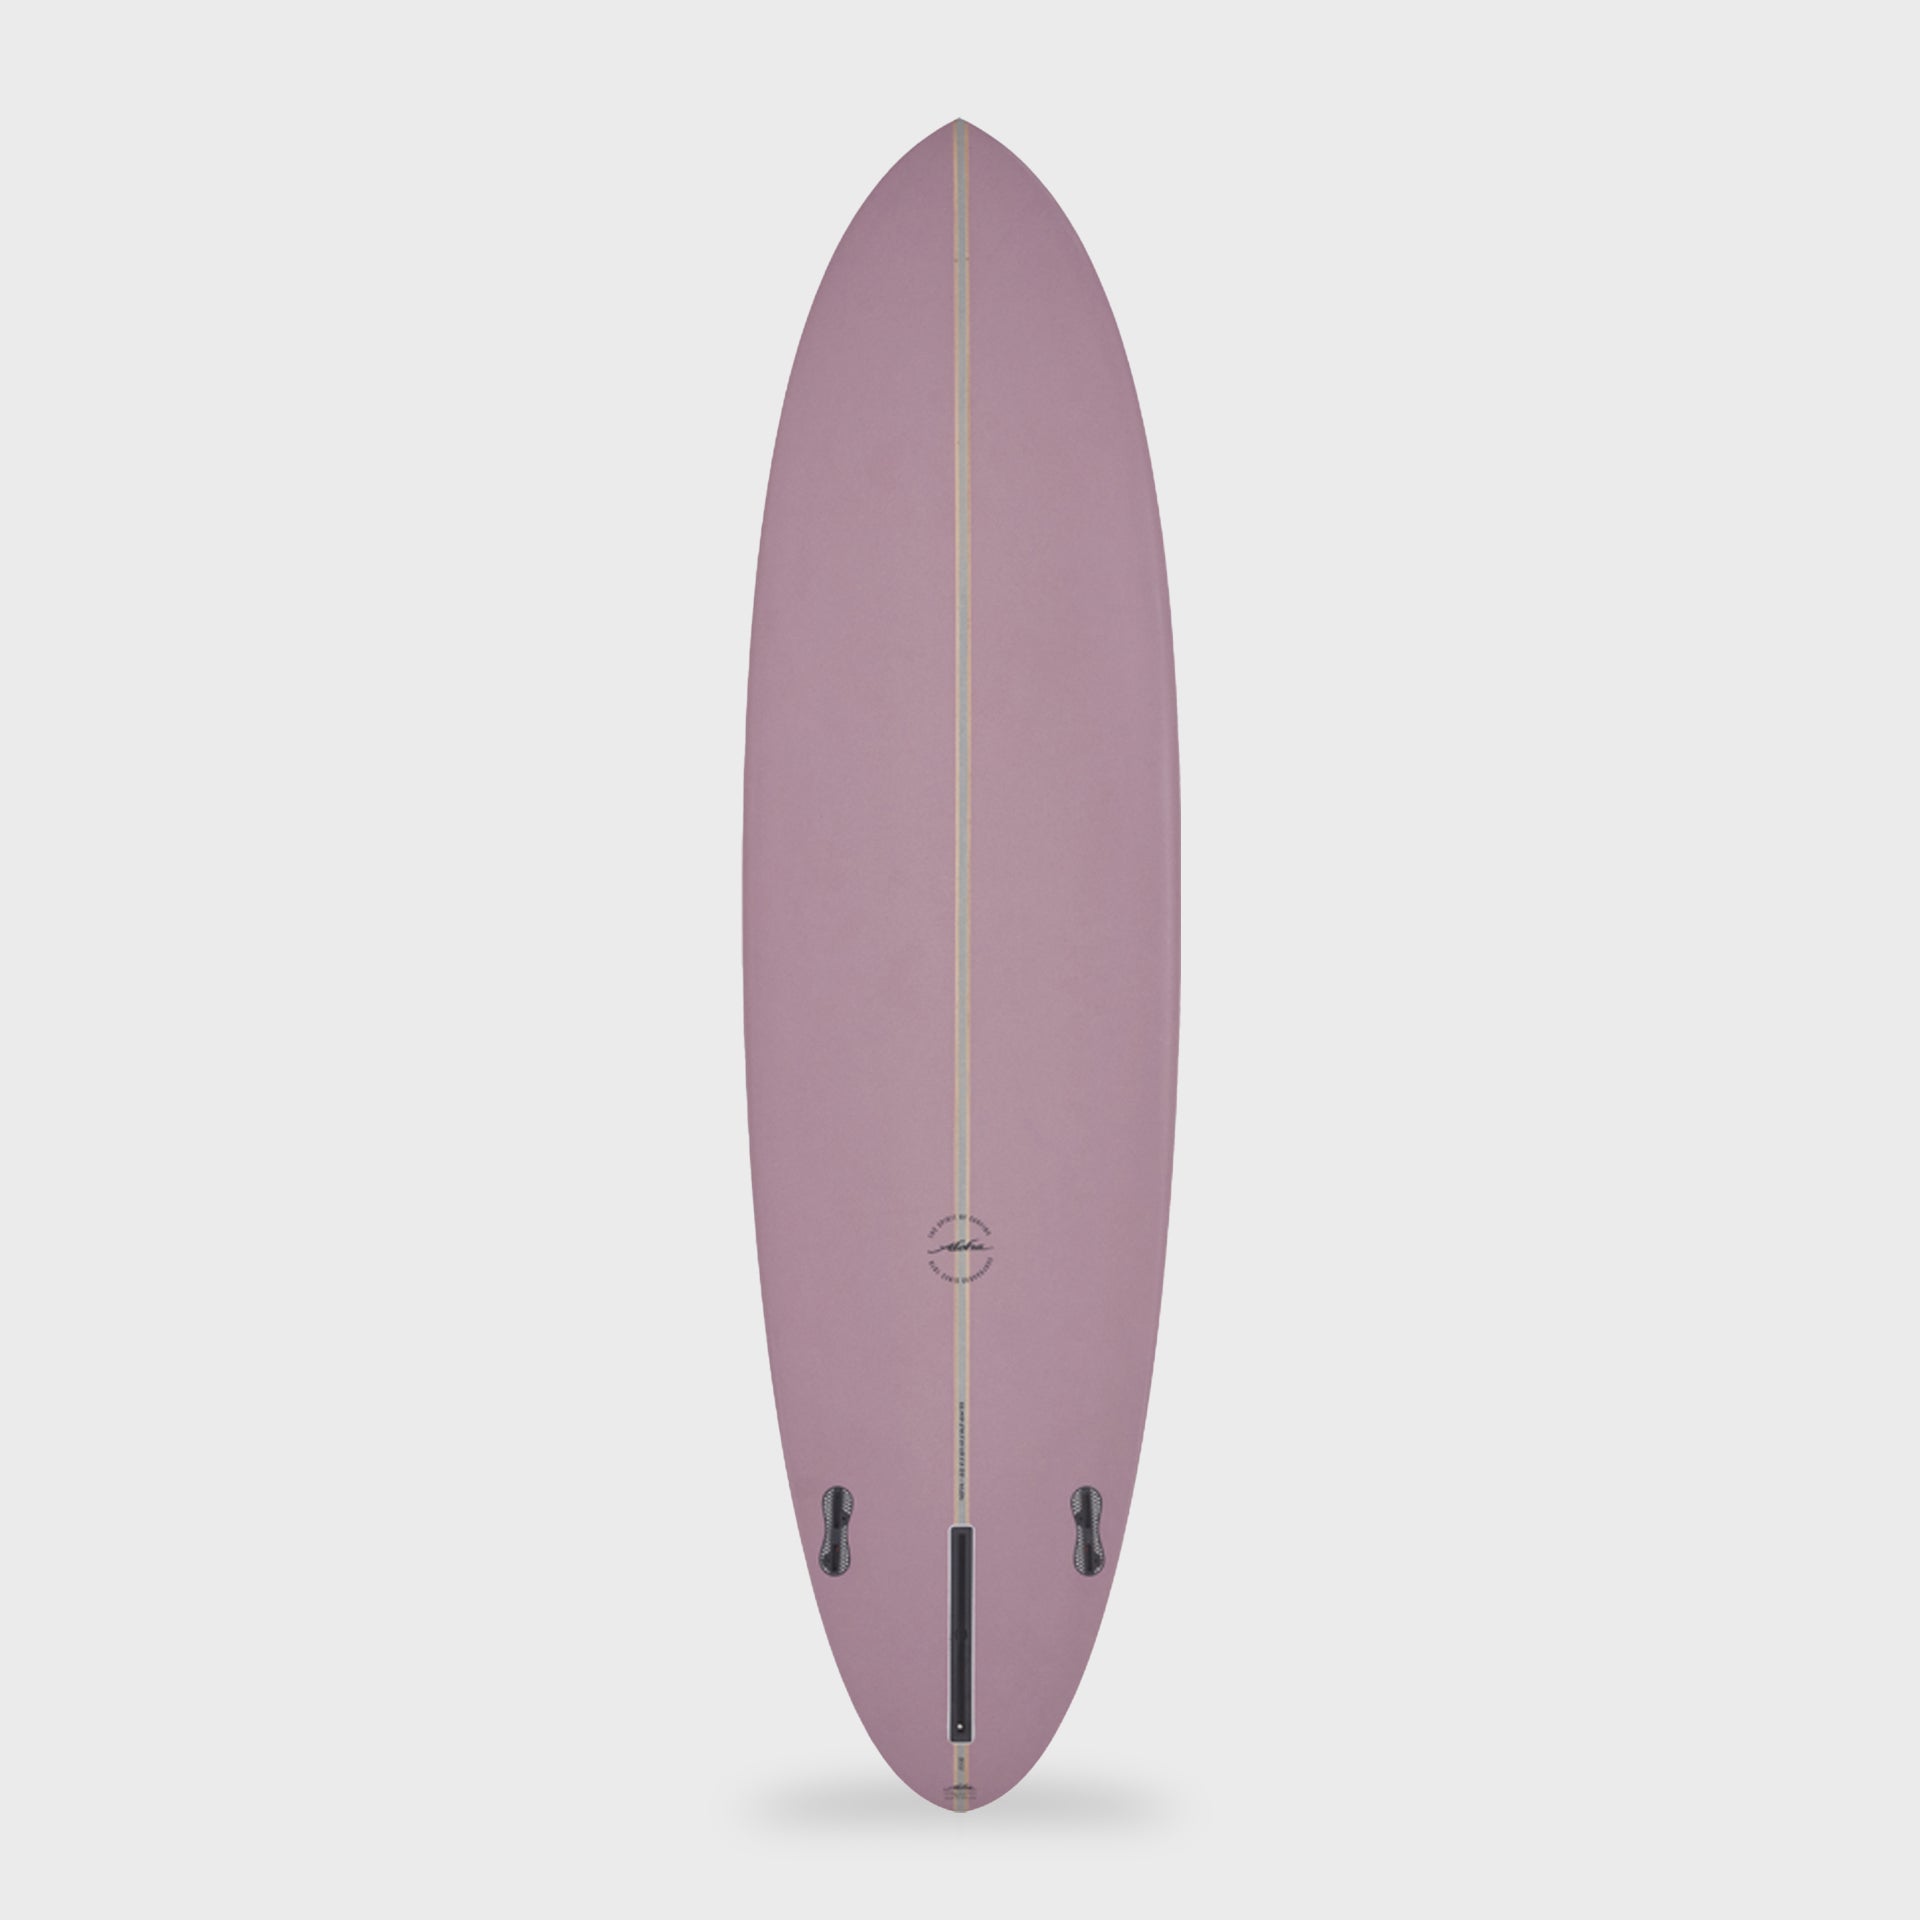 EZ - MID PU - PVCP - Surfboard, 6'6, 6'10, 7'2, 7'4 and 7'8 - Lavender - ManGo Surfing